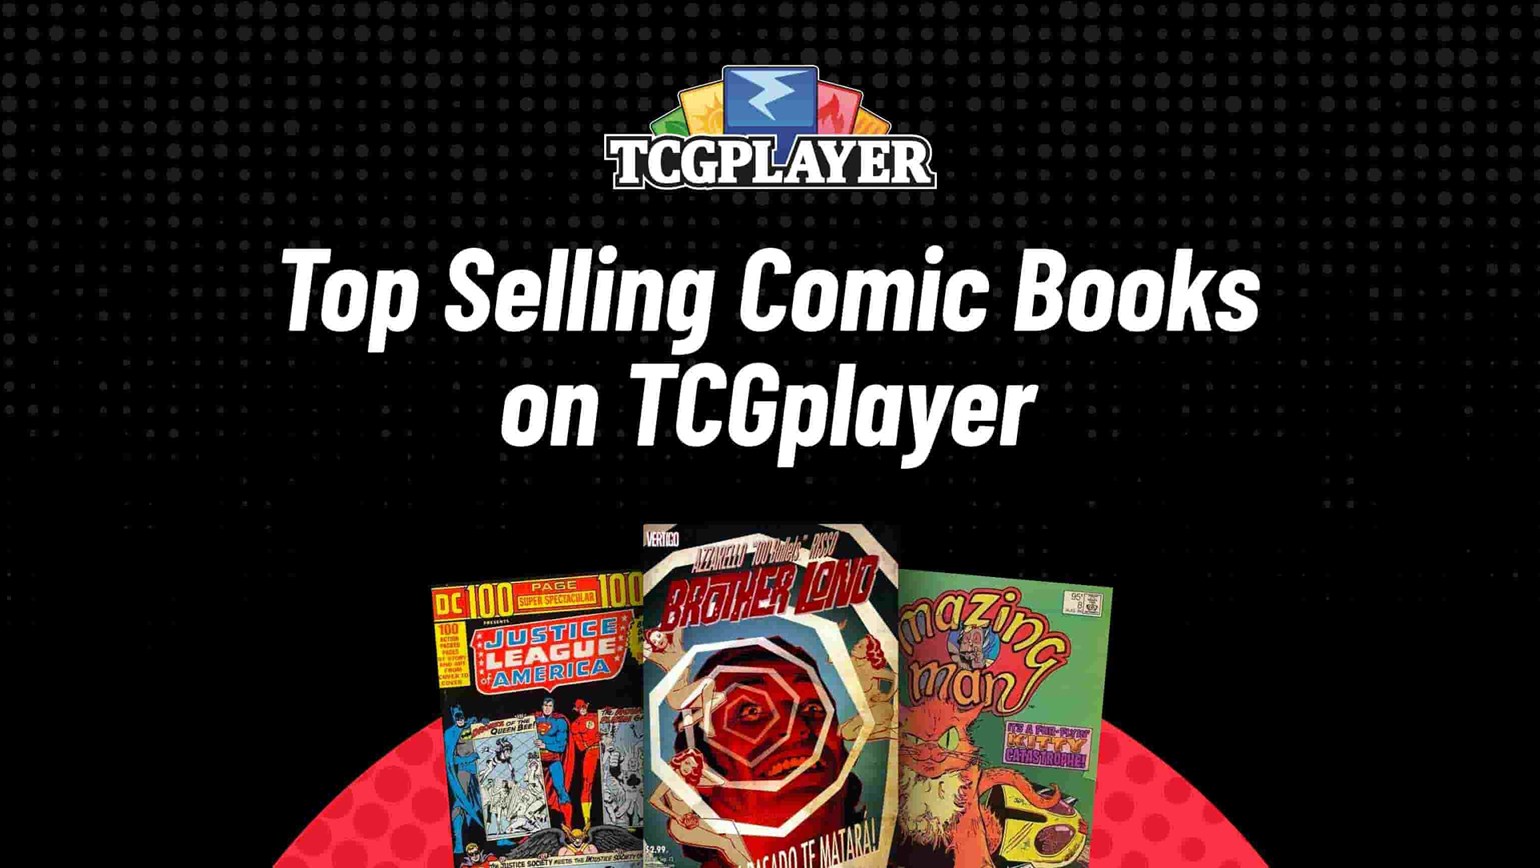 December Top Selling Comic Books on TCGplayer